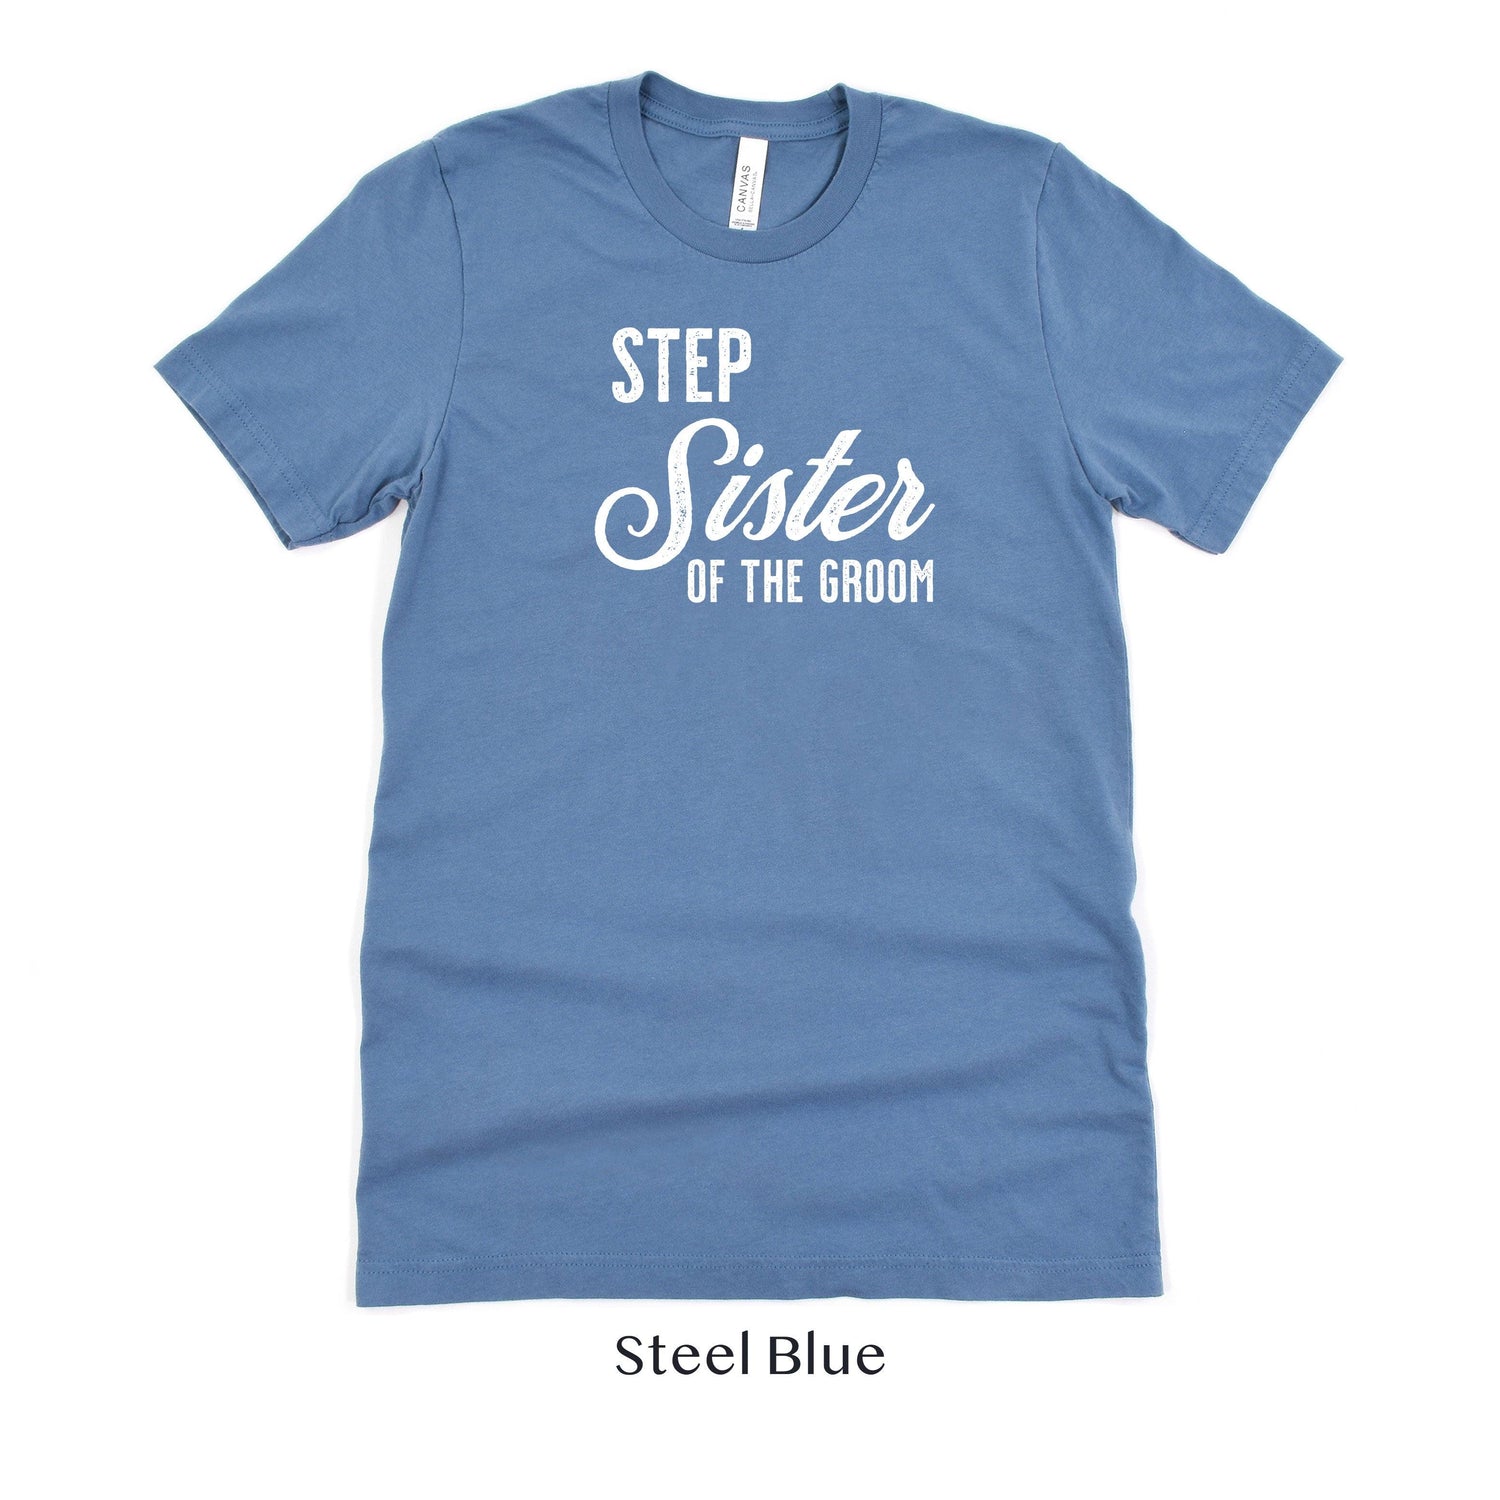 Step Sister of the Groom - Vintage Romance Wedding Party Unisex t-shirt by Oaklynn Lane